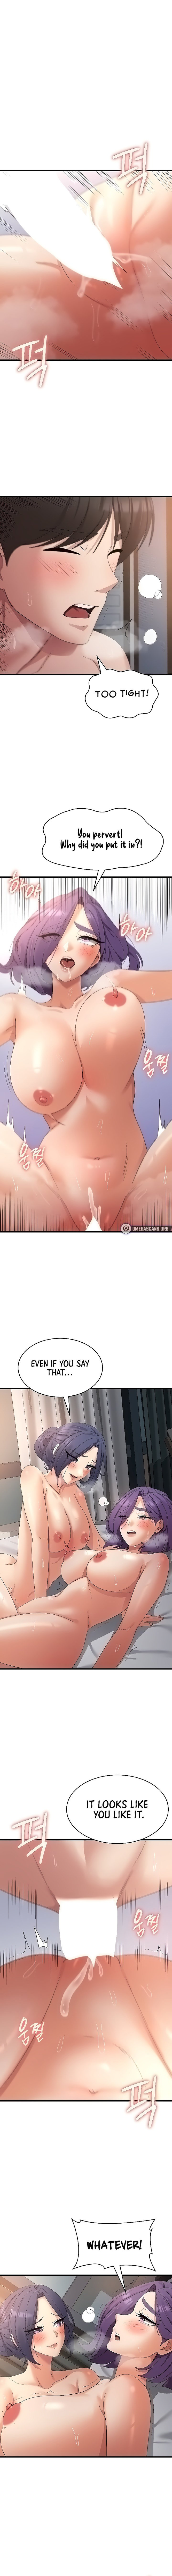 sexy-man-and-woman-chap-38-2